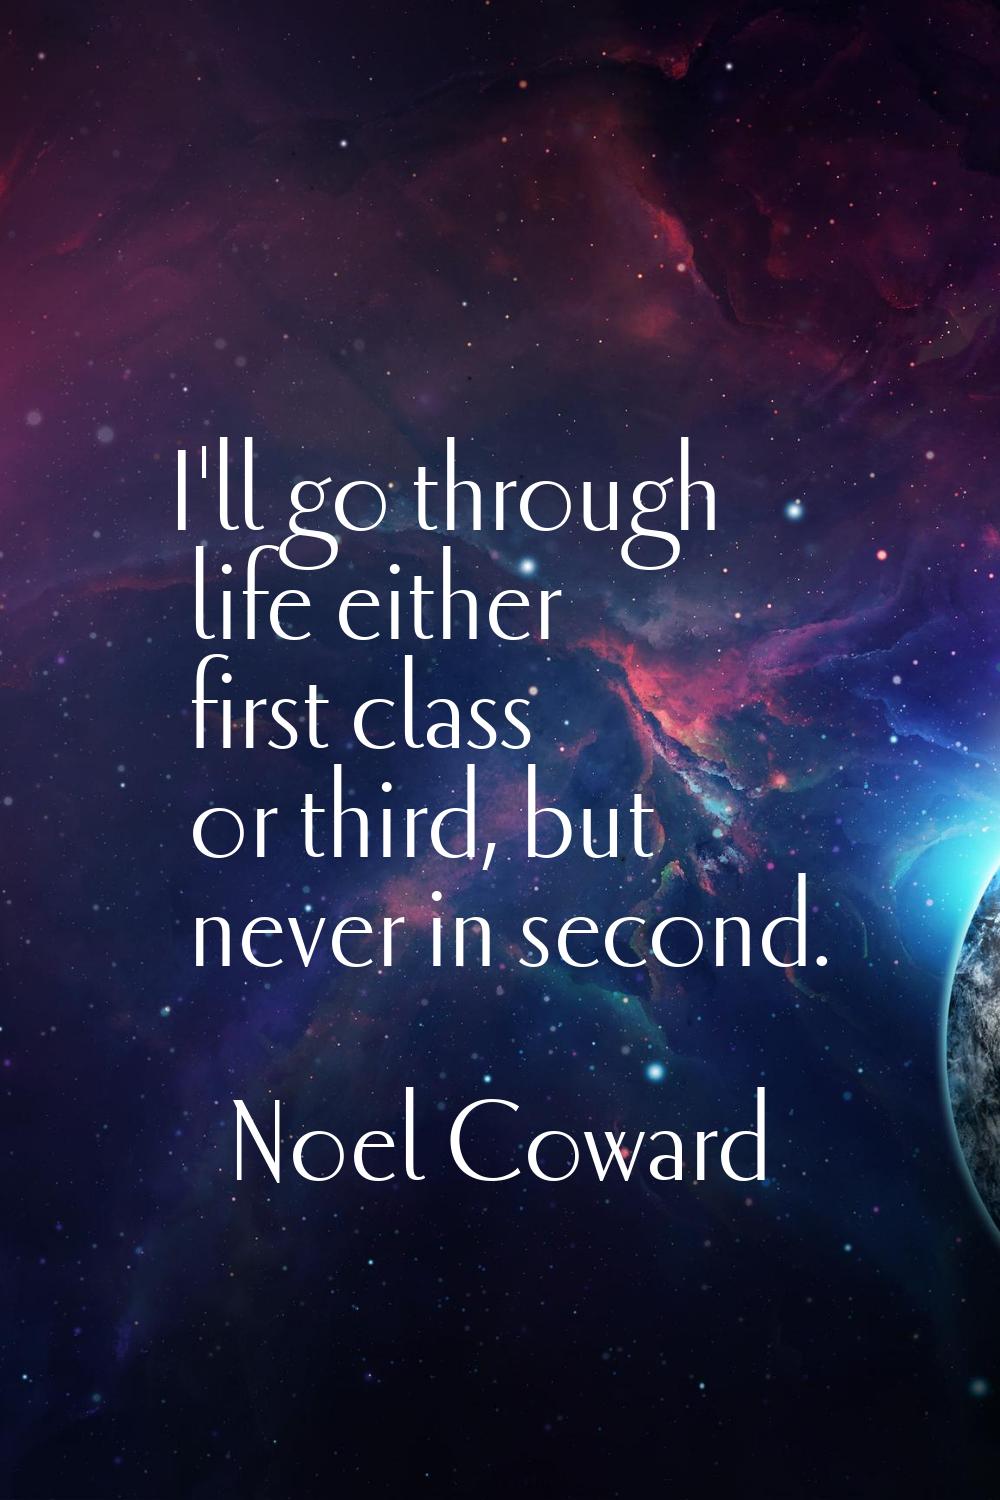 I'll go through life either first class or third, but never in second.